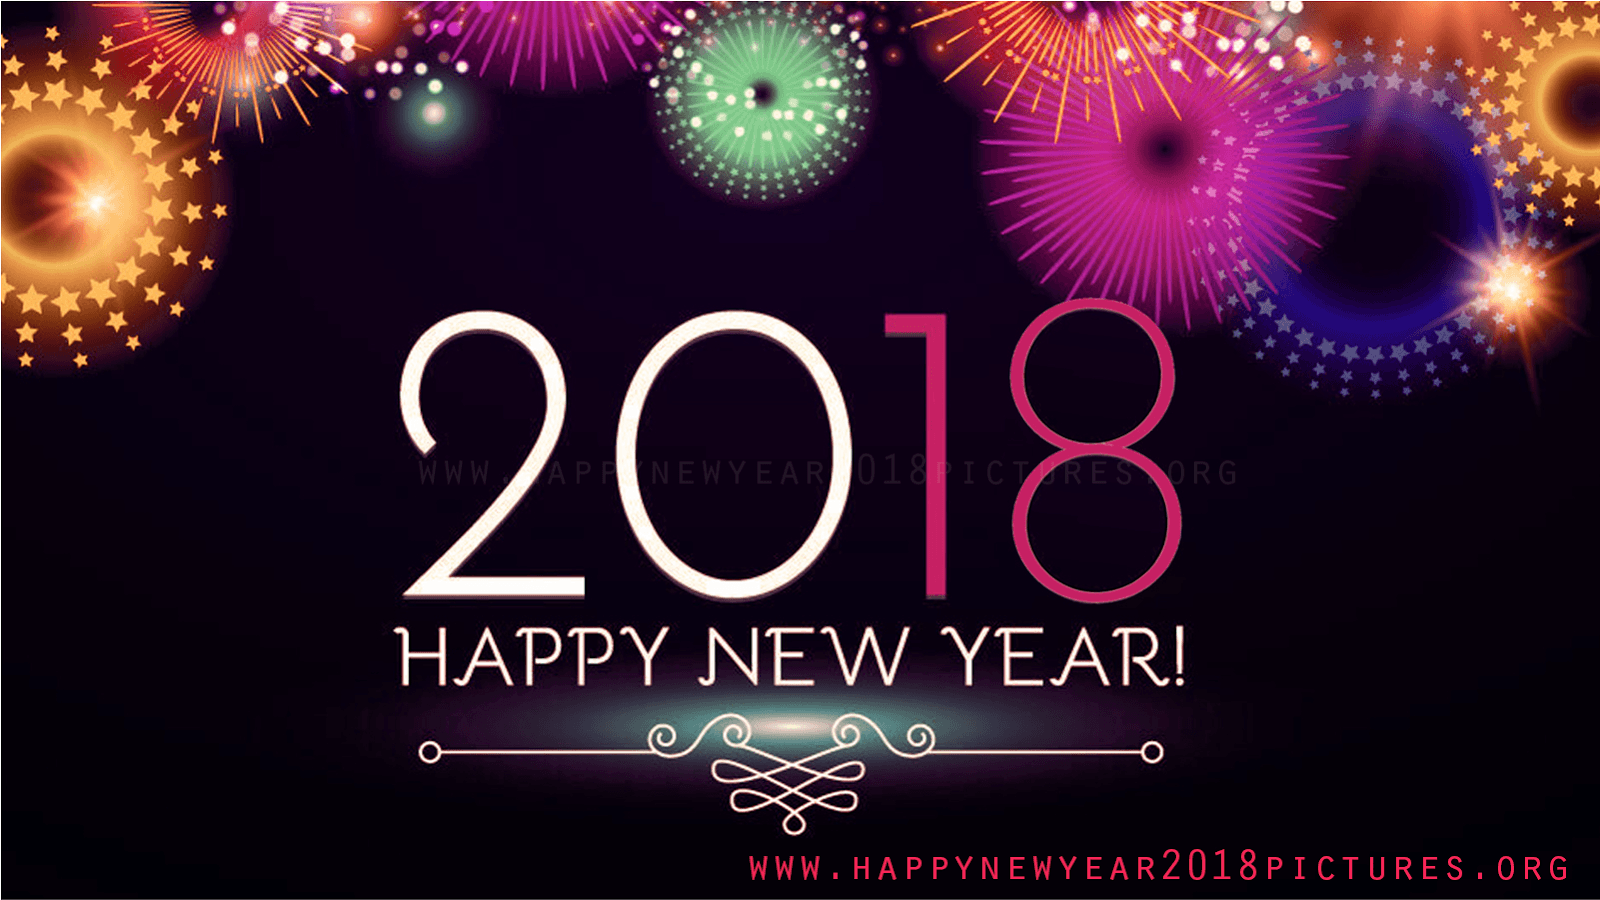 Happy New Year 2018 Quotes. Free Image and